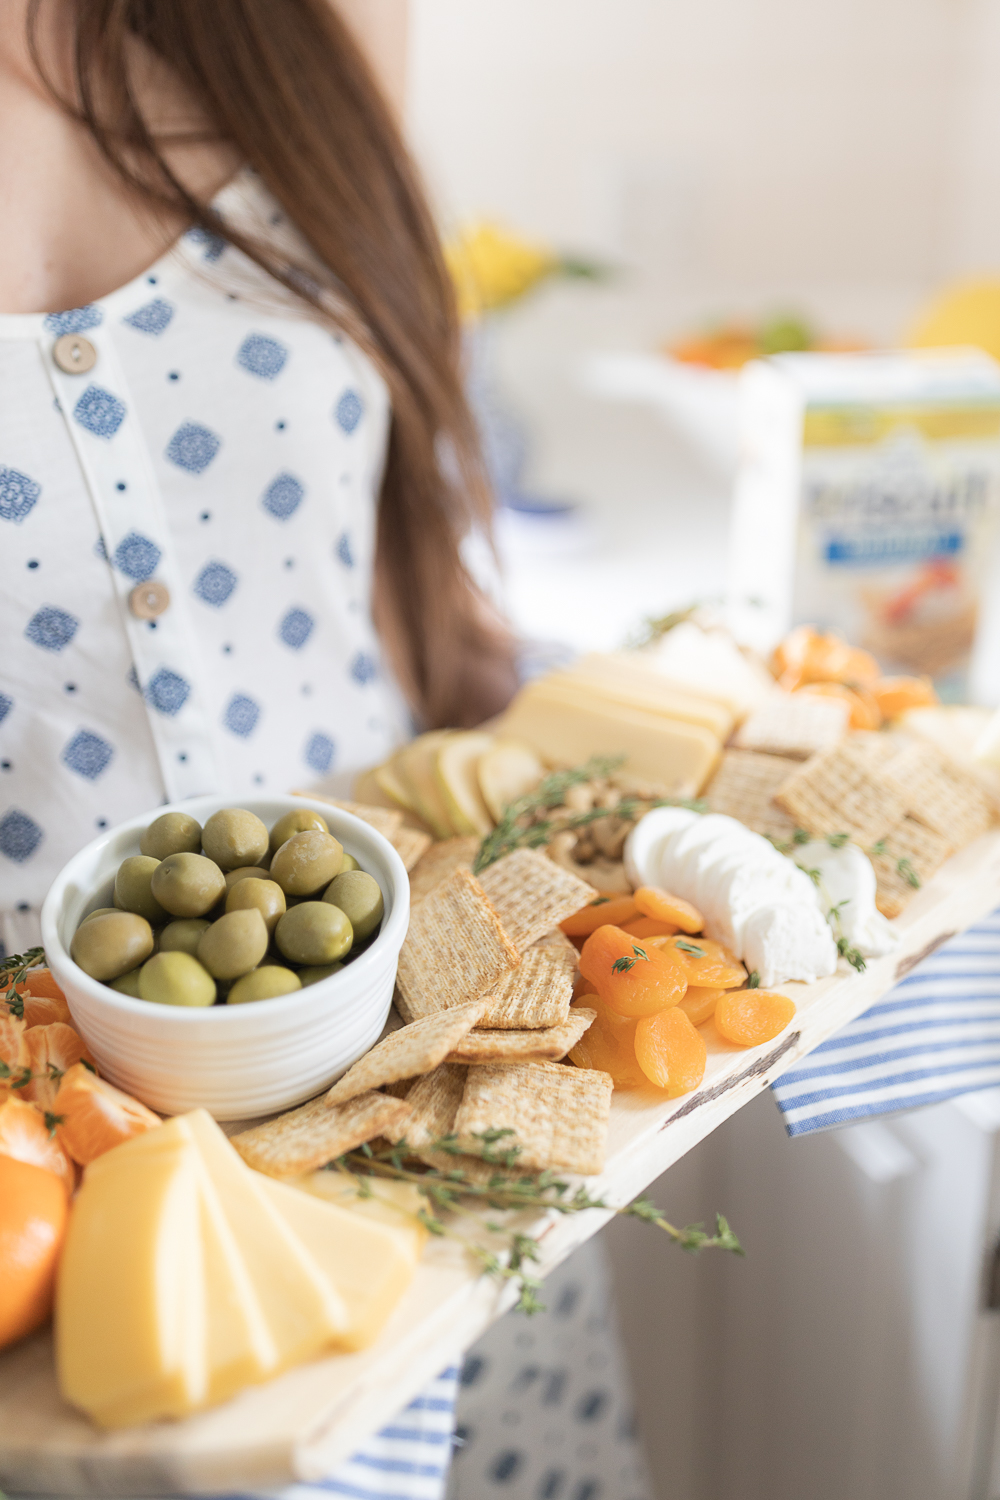 Budget-friendly cheese board recipe featuring Triscuits, Mezzetta Colossal Fancy Green Olives, dried apricots, and other common pantry items by blogger Stephanie Ziajka on Diary of a Debutante